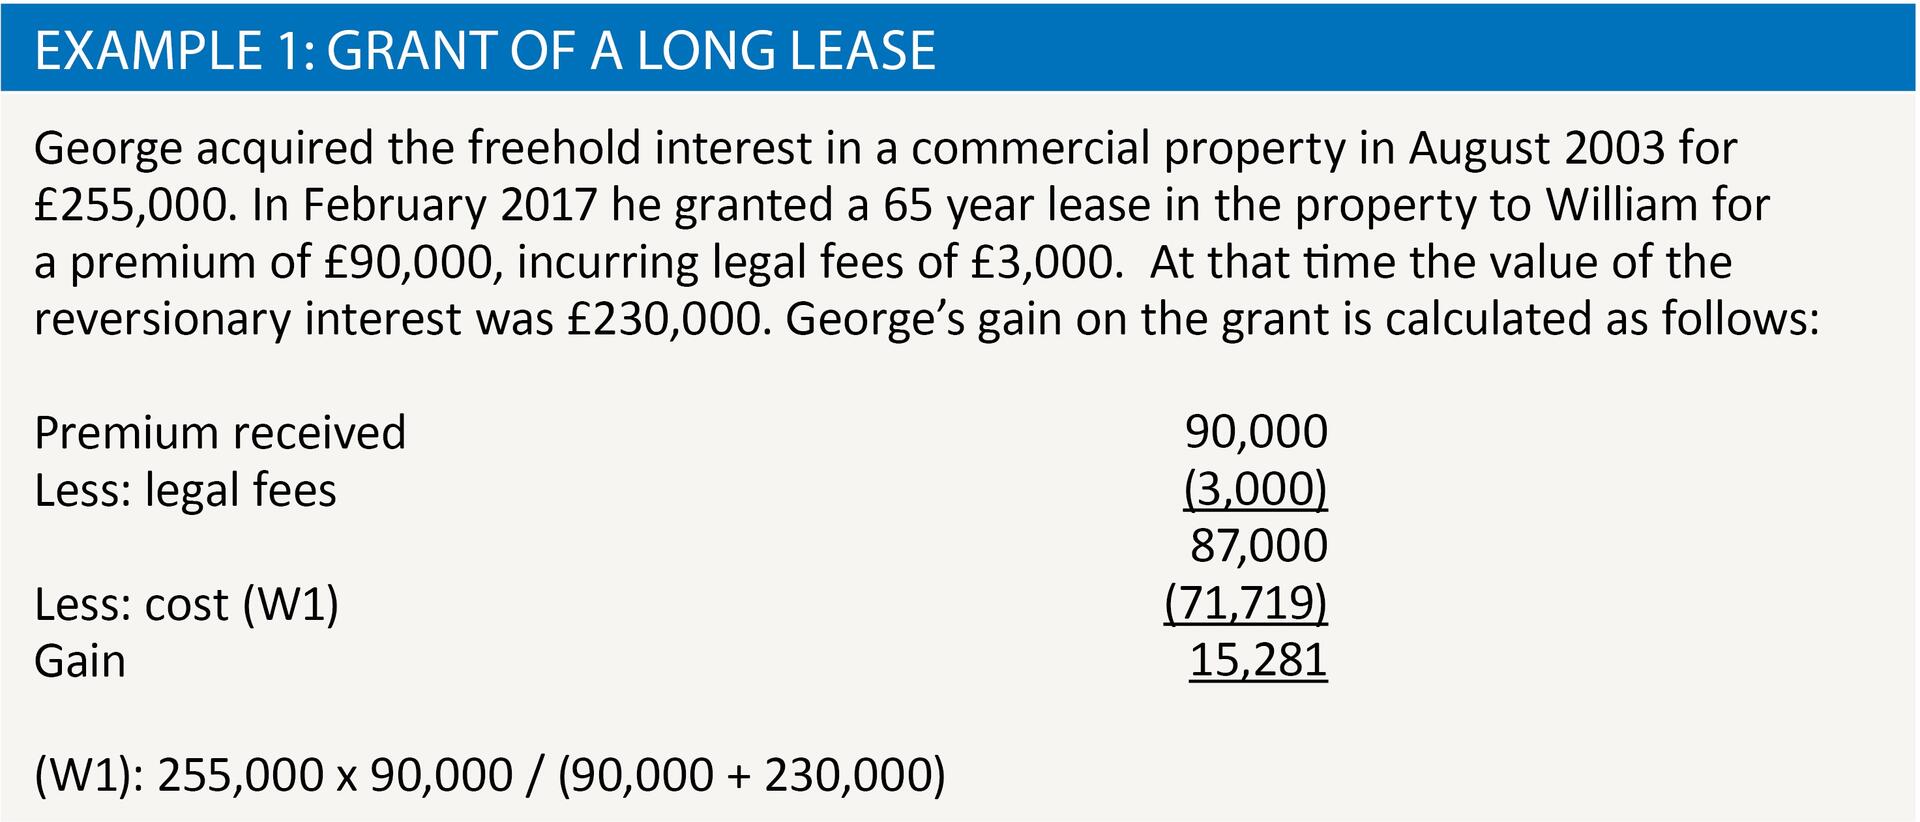 assignment of long lease